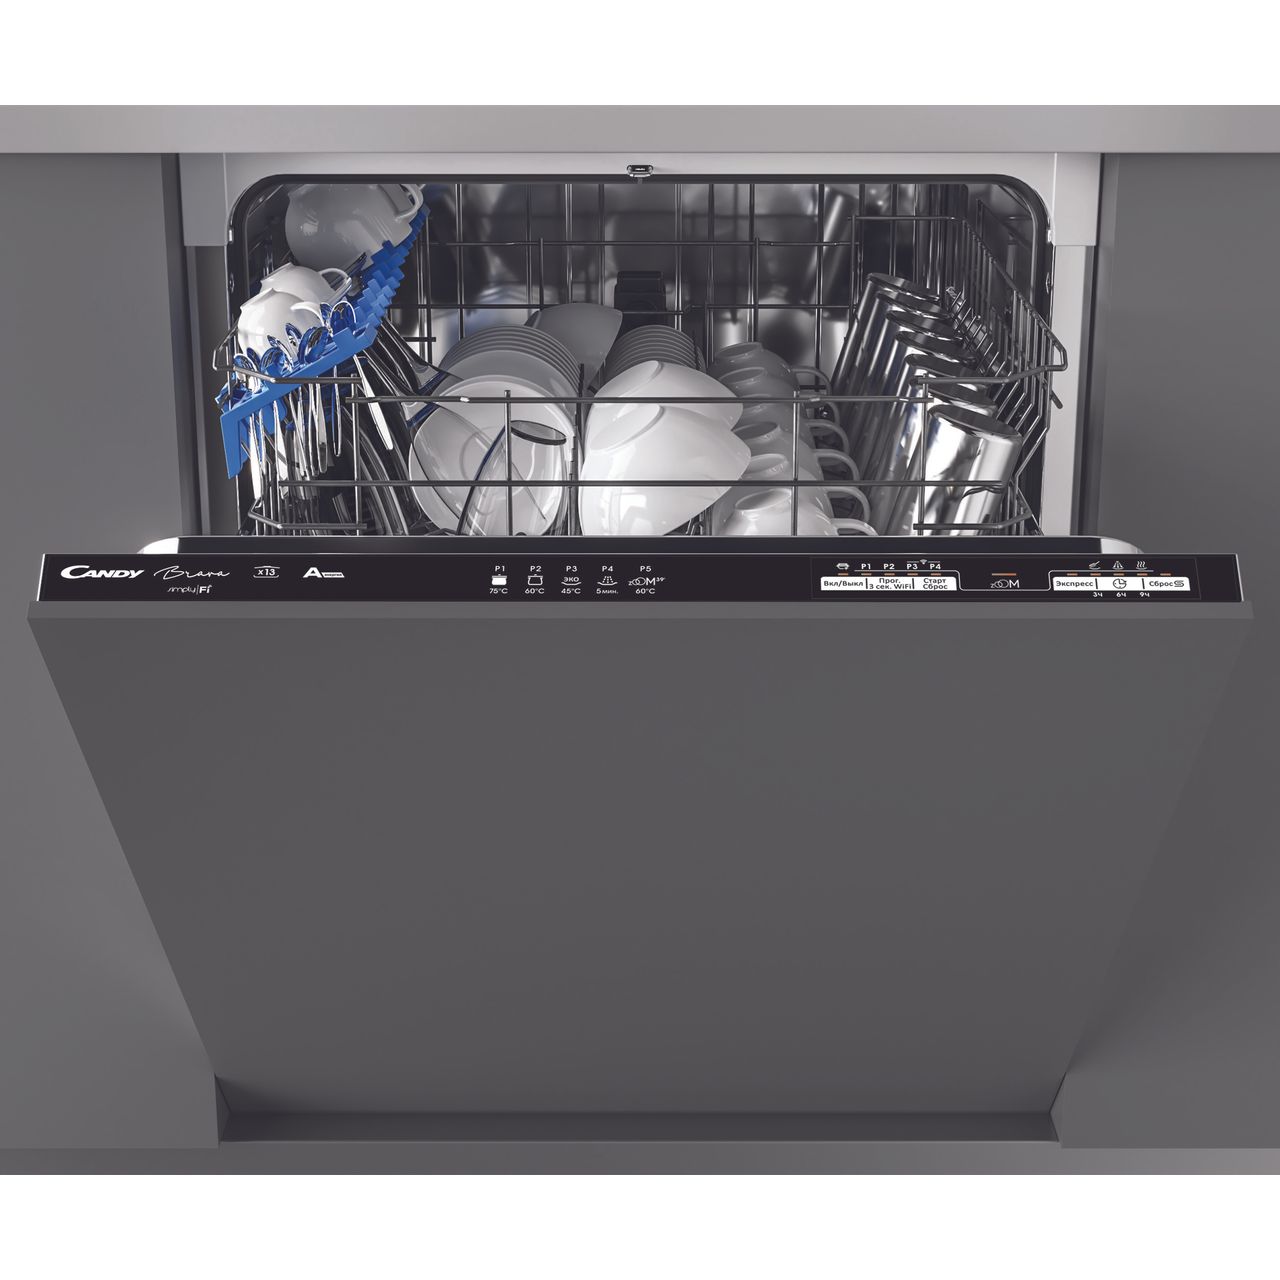 Candy Brava CDIN1L380PB Wifi Connected Fully Integrated Standard Dishwasher Review